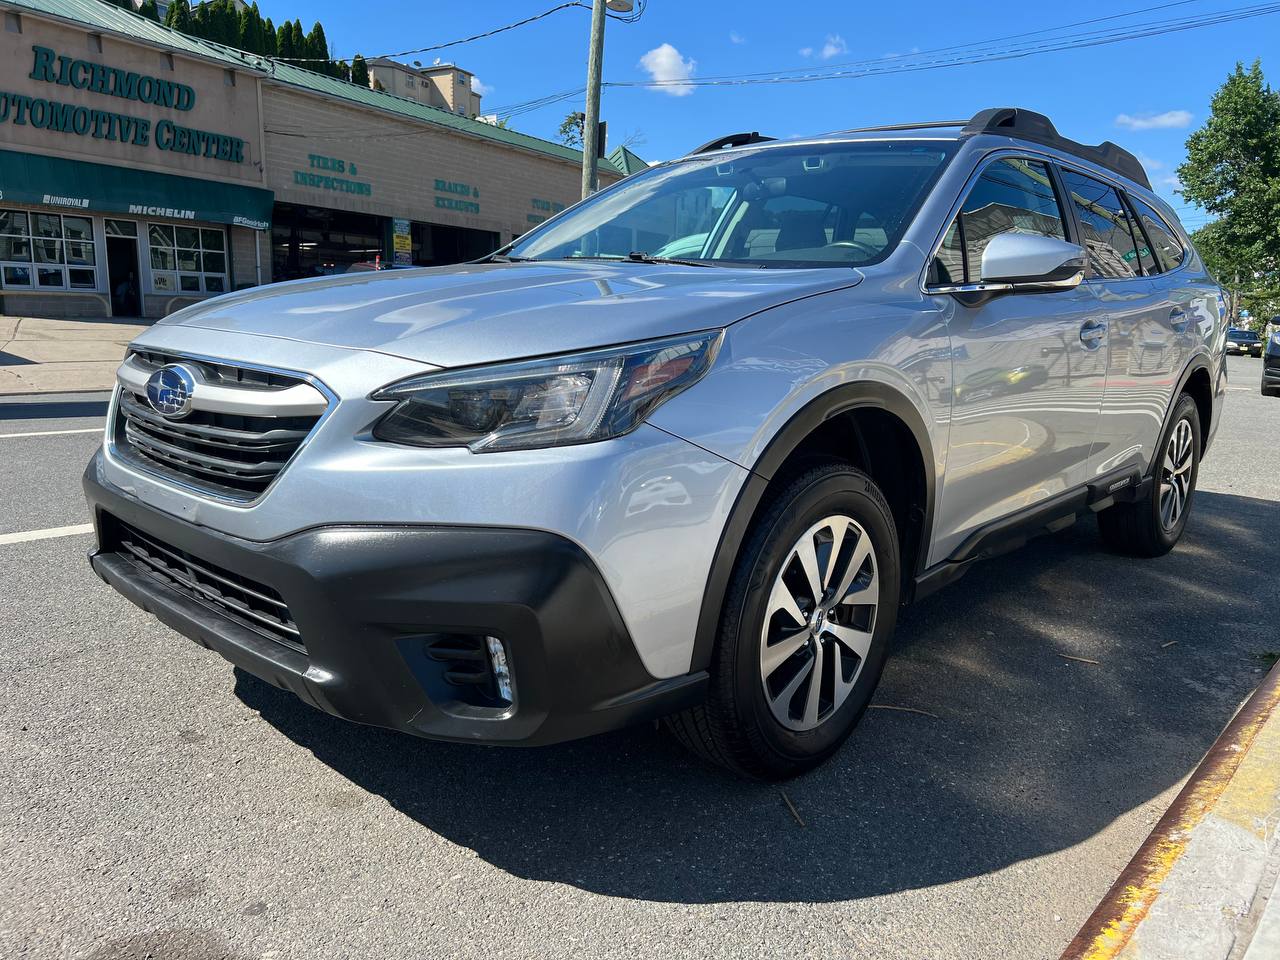 Used Car for sale - 2020 Outback Premium AWD Subaru  in Staten Island, NY